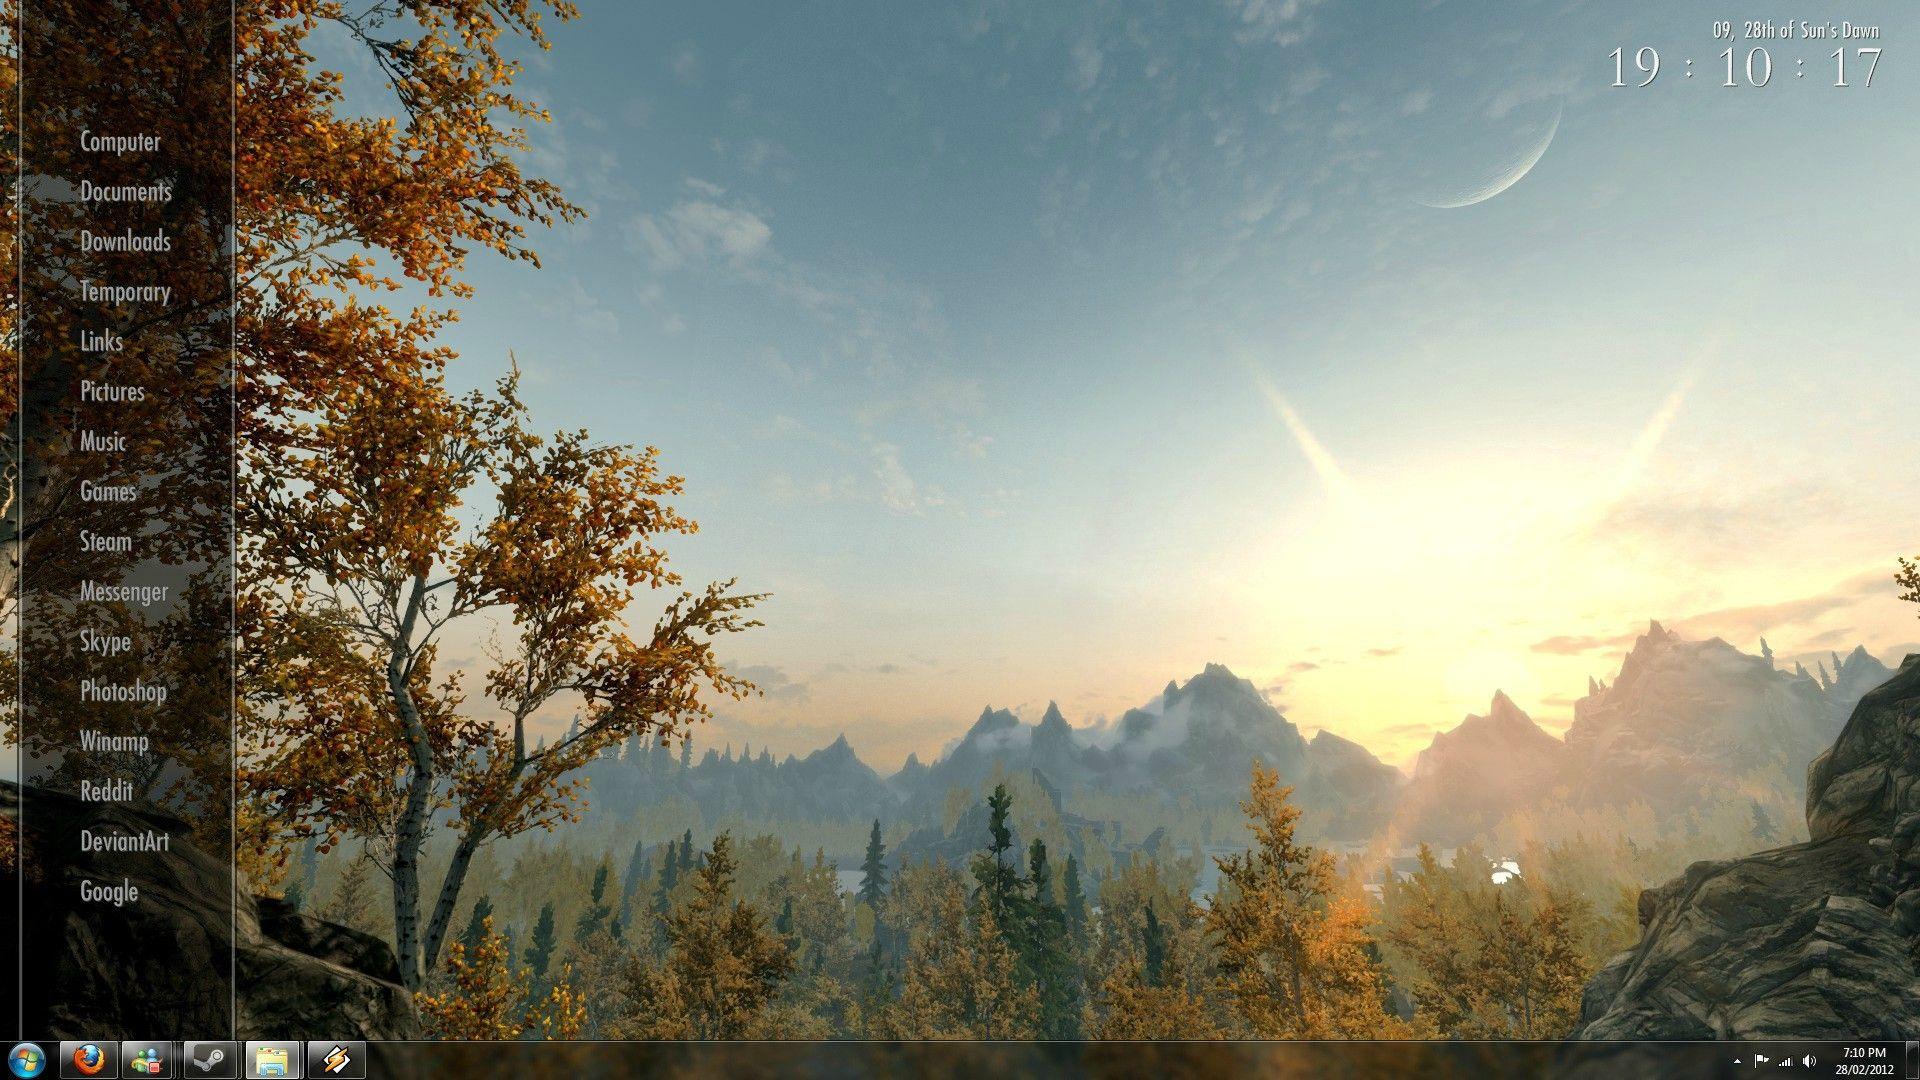 My 1920x1080 Skyrim wallpaper collection (300 files!)